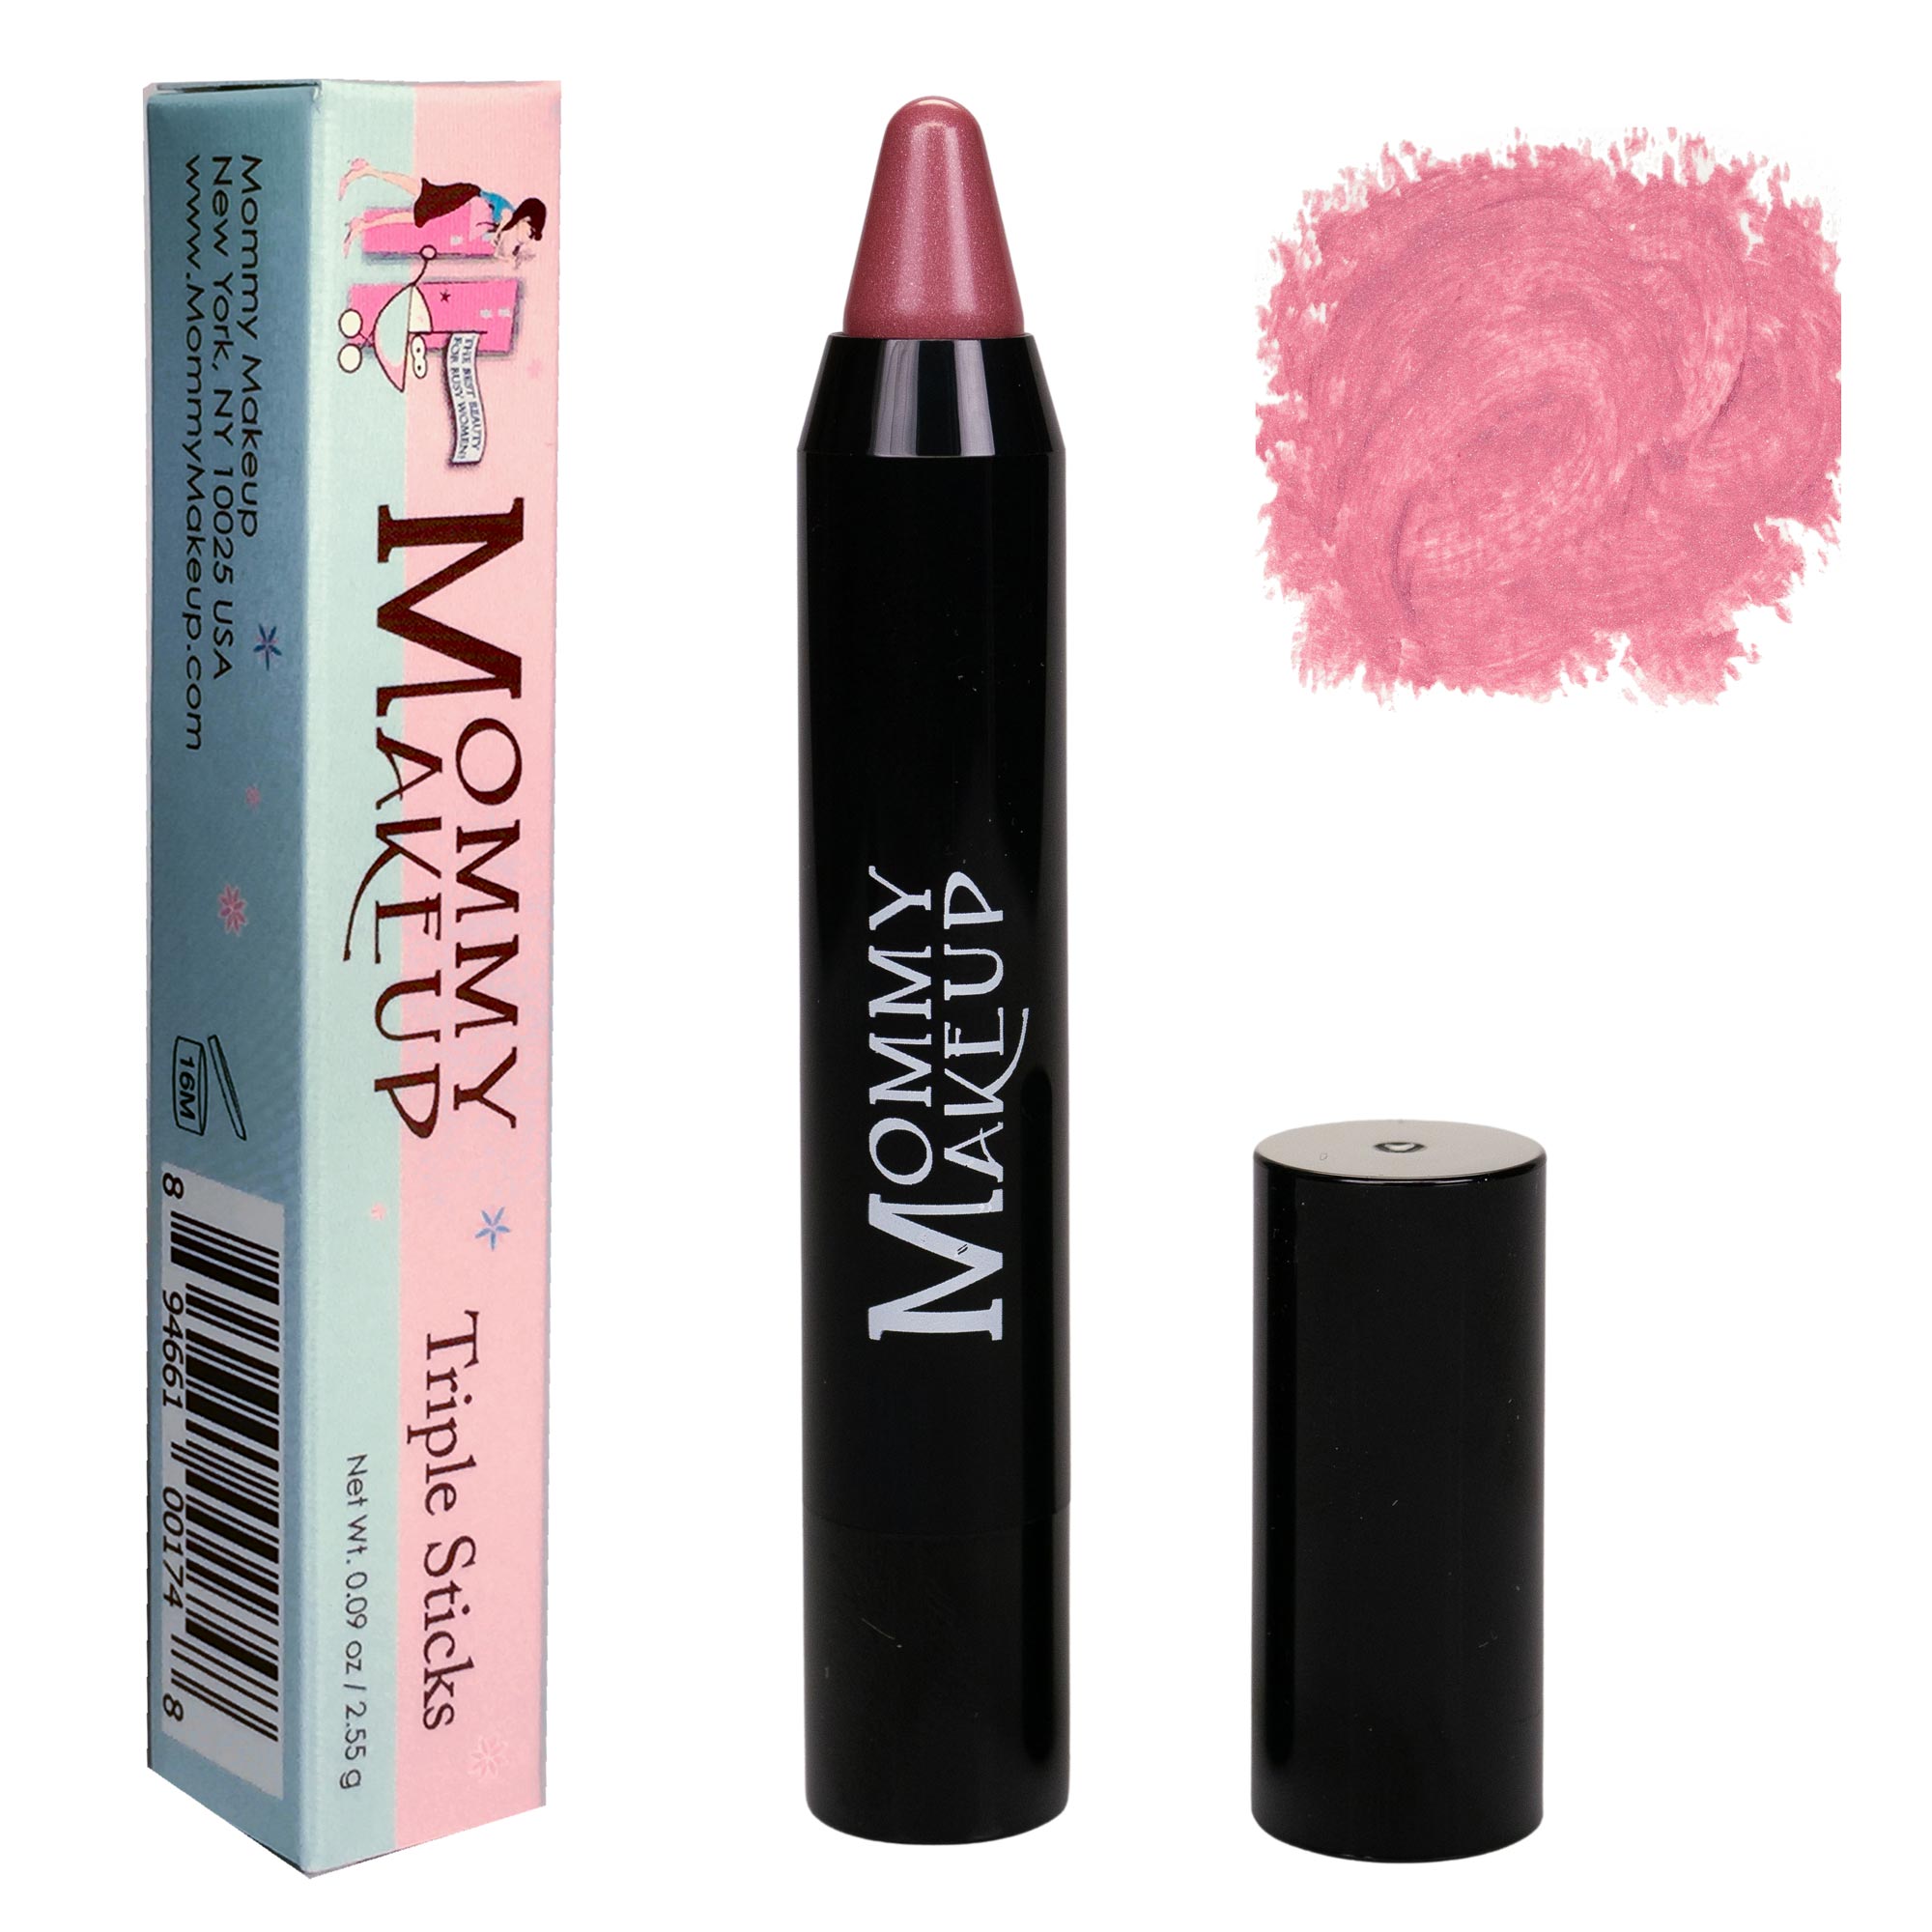 Triple Sticks Lipstick, Cream Blush, and Treatment in Pink Daisy - a daisy pink with shimmer